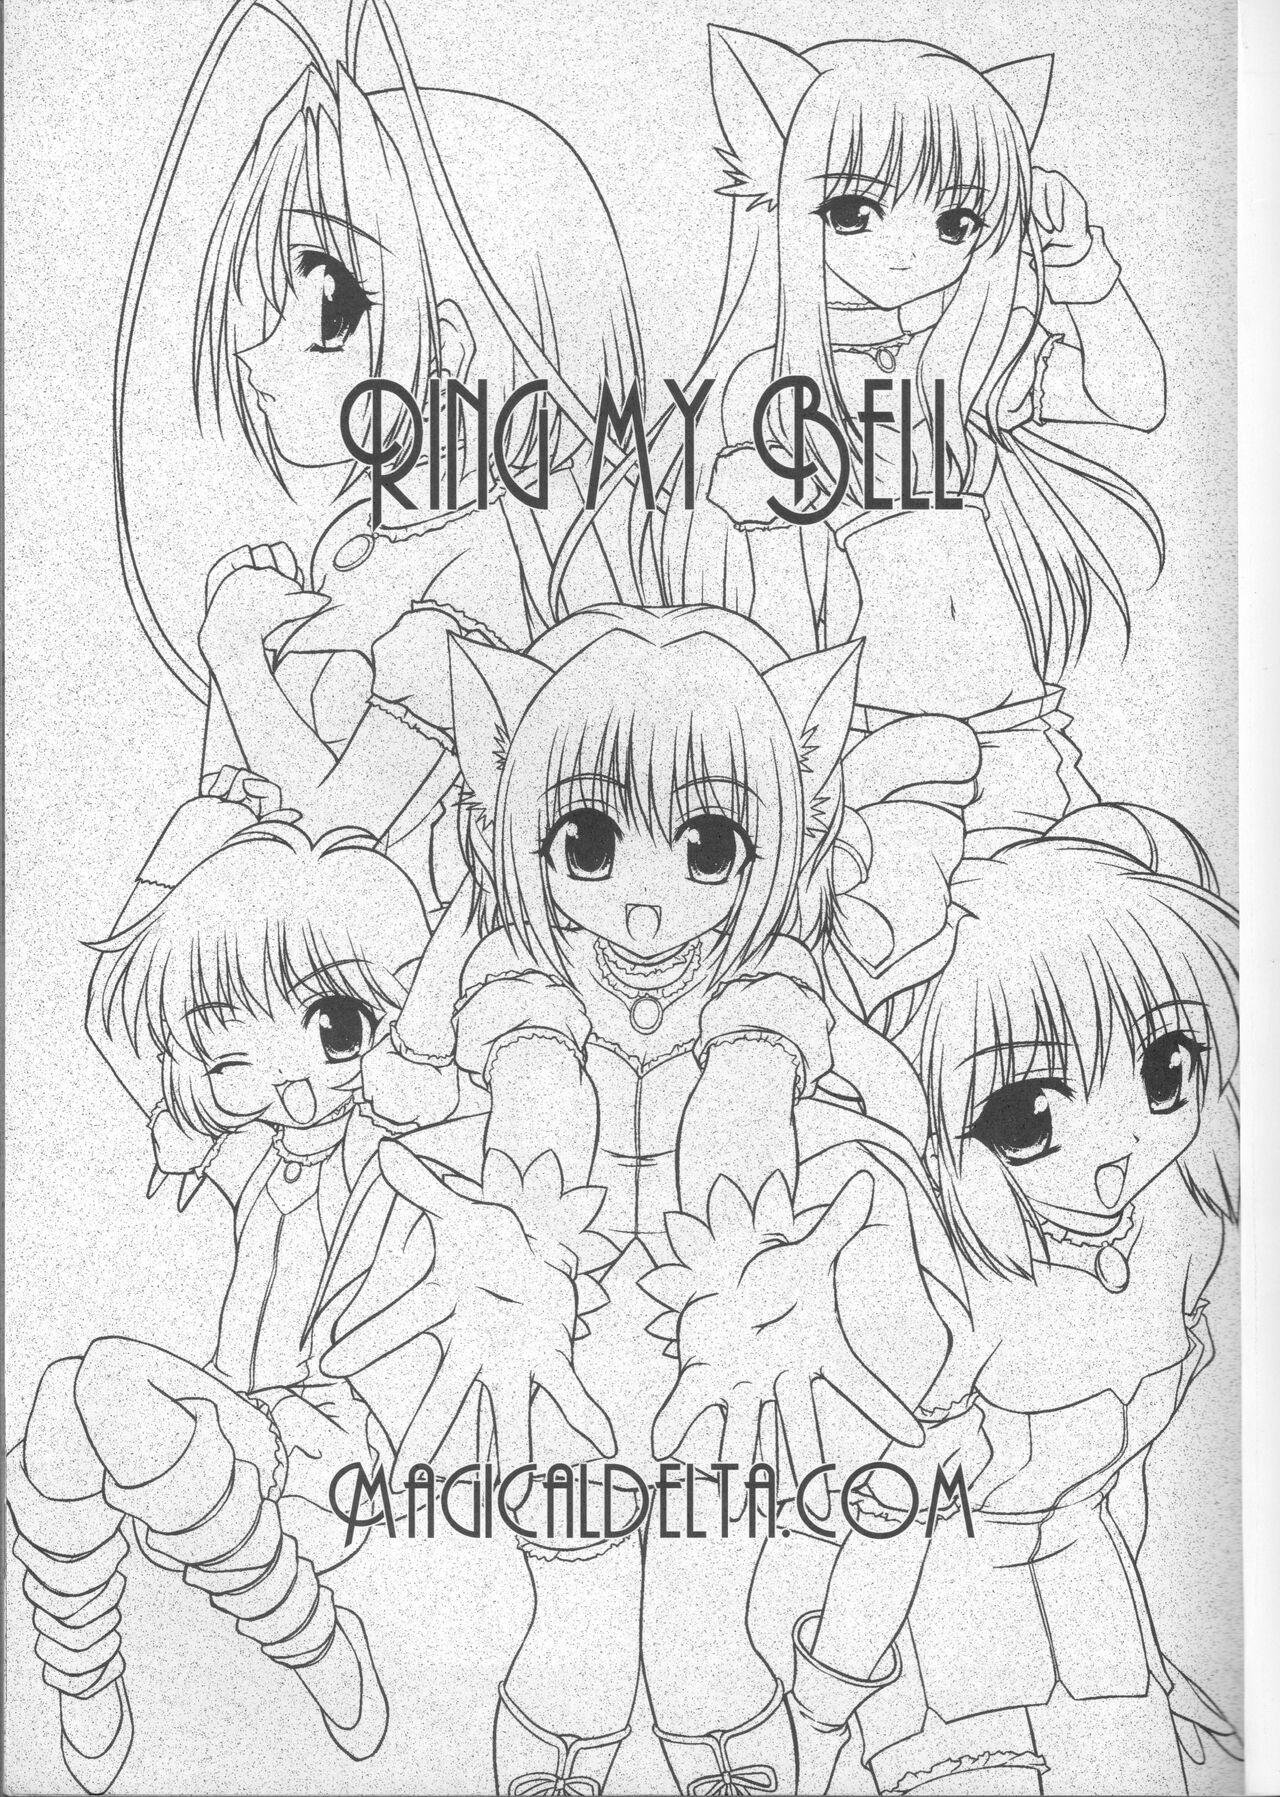 Neighbor Ring My Bell - MAGICALDELTA.COM - Tokyo mew mew | mew mew power Secret - Page 2